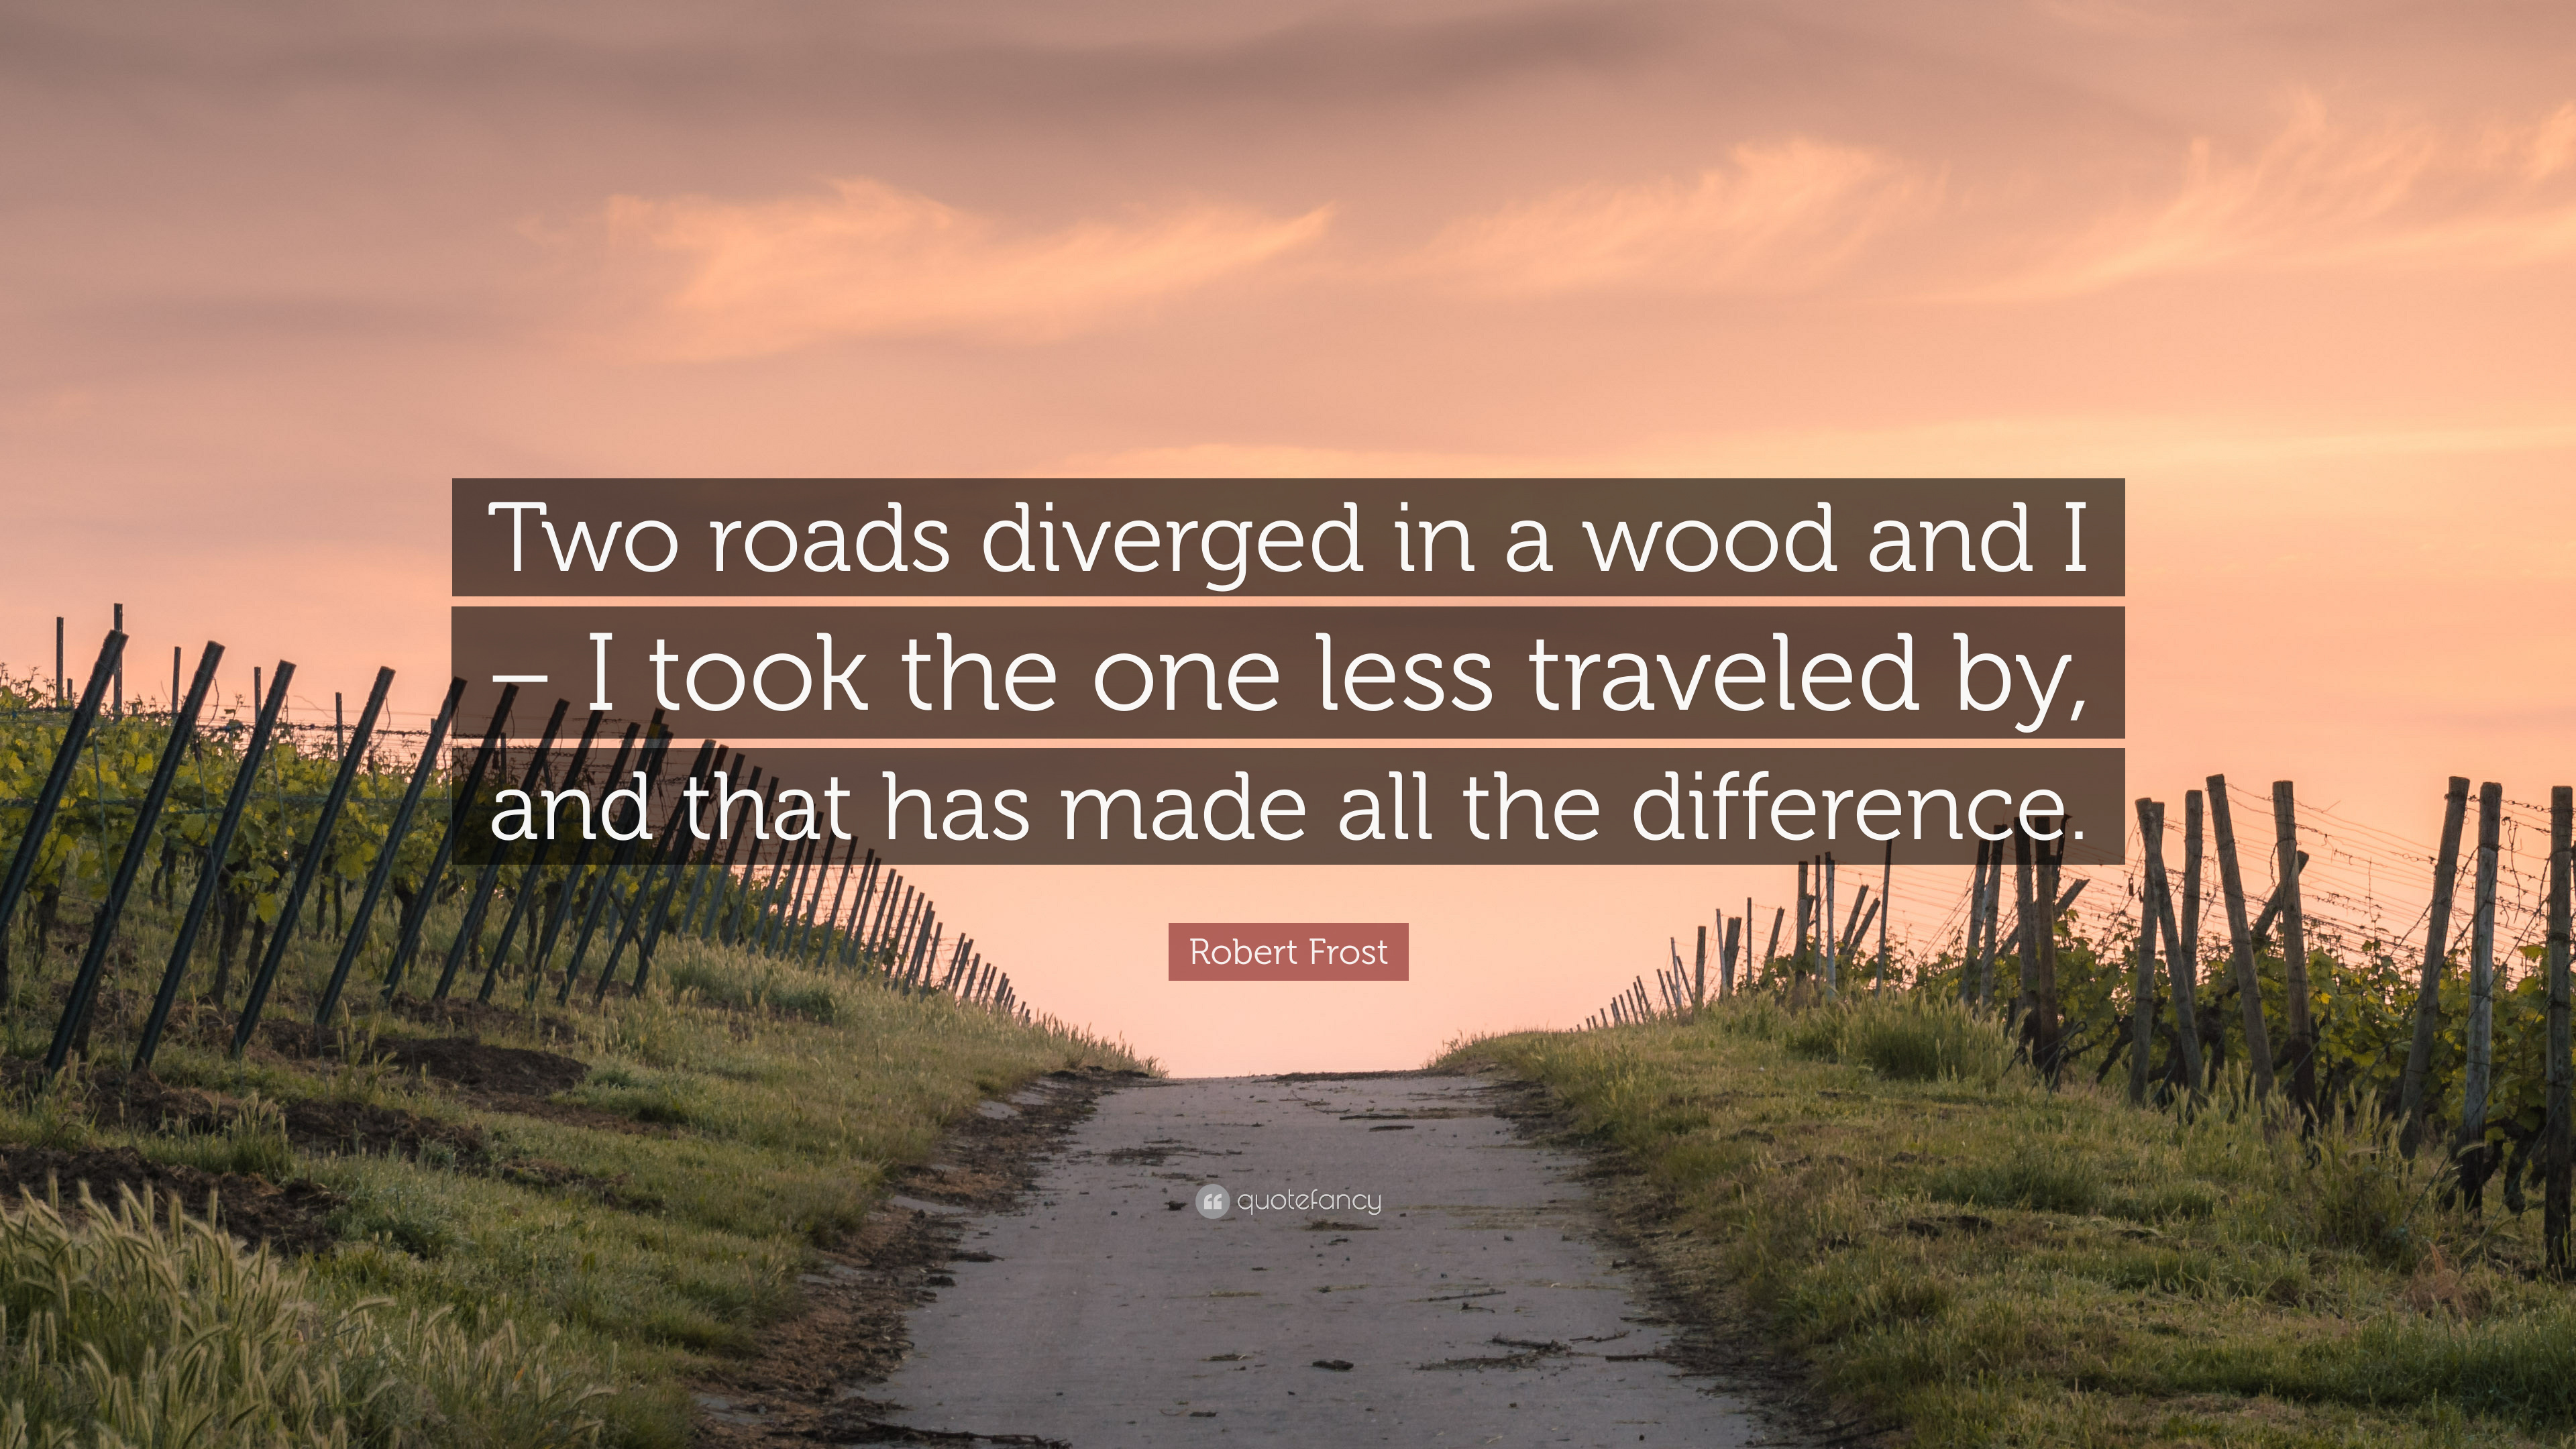 Robert Frost Quote: “Two roads diverged in a wood and I